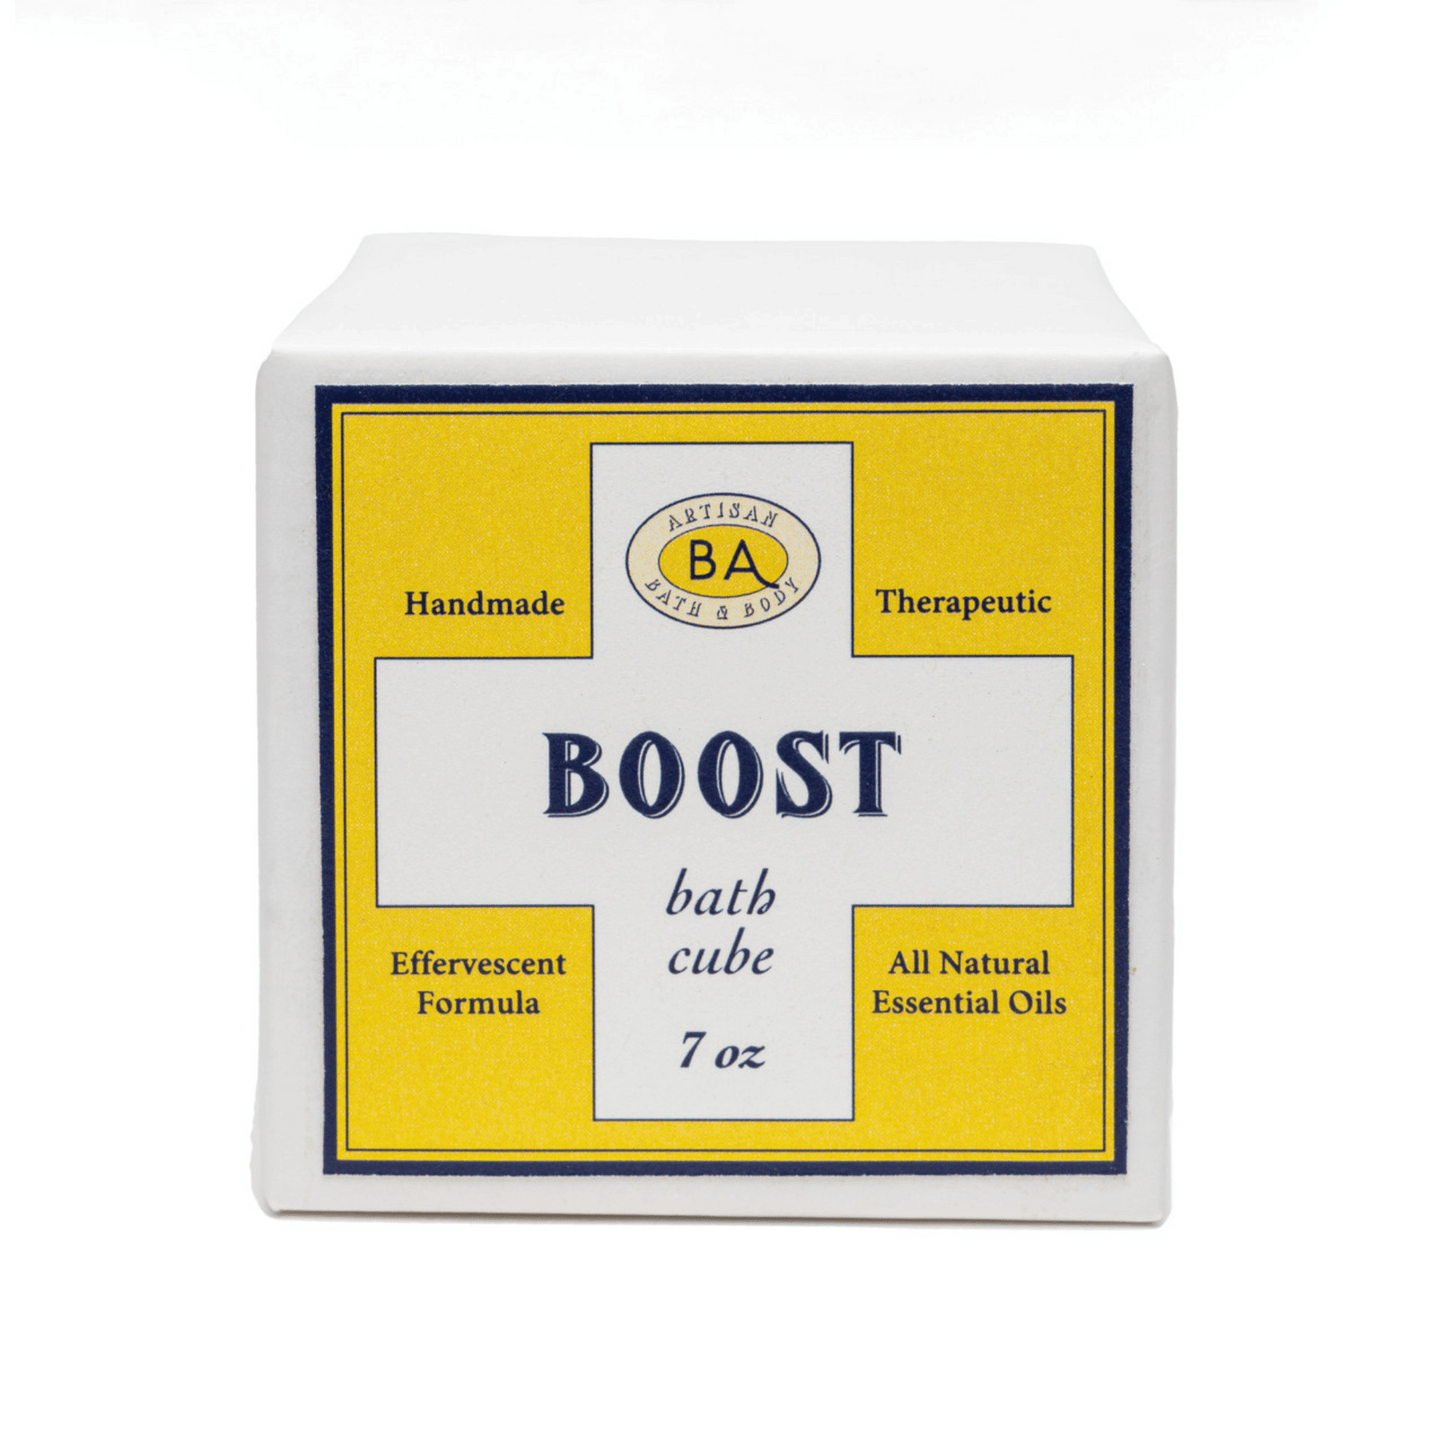 Primary Image of Boost Bath Cube